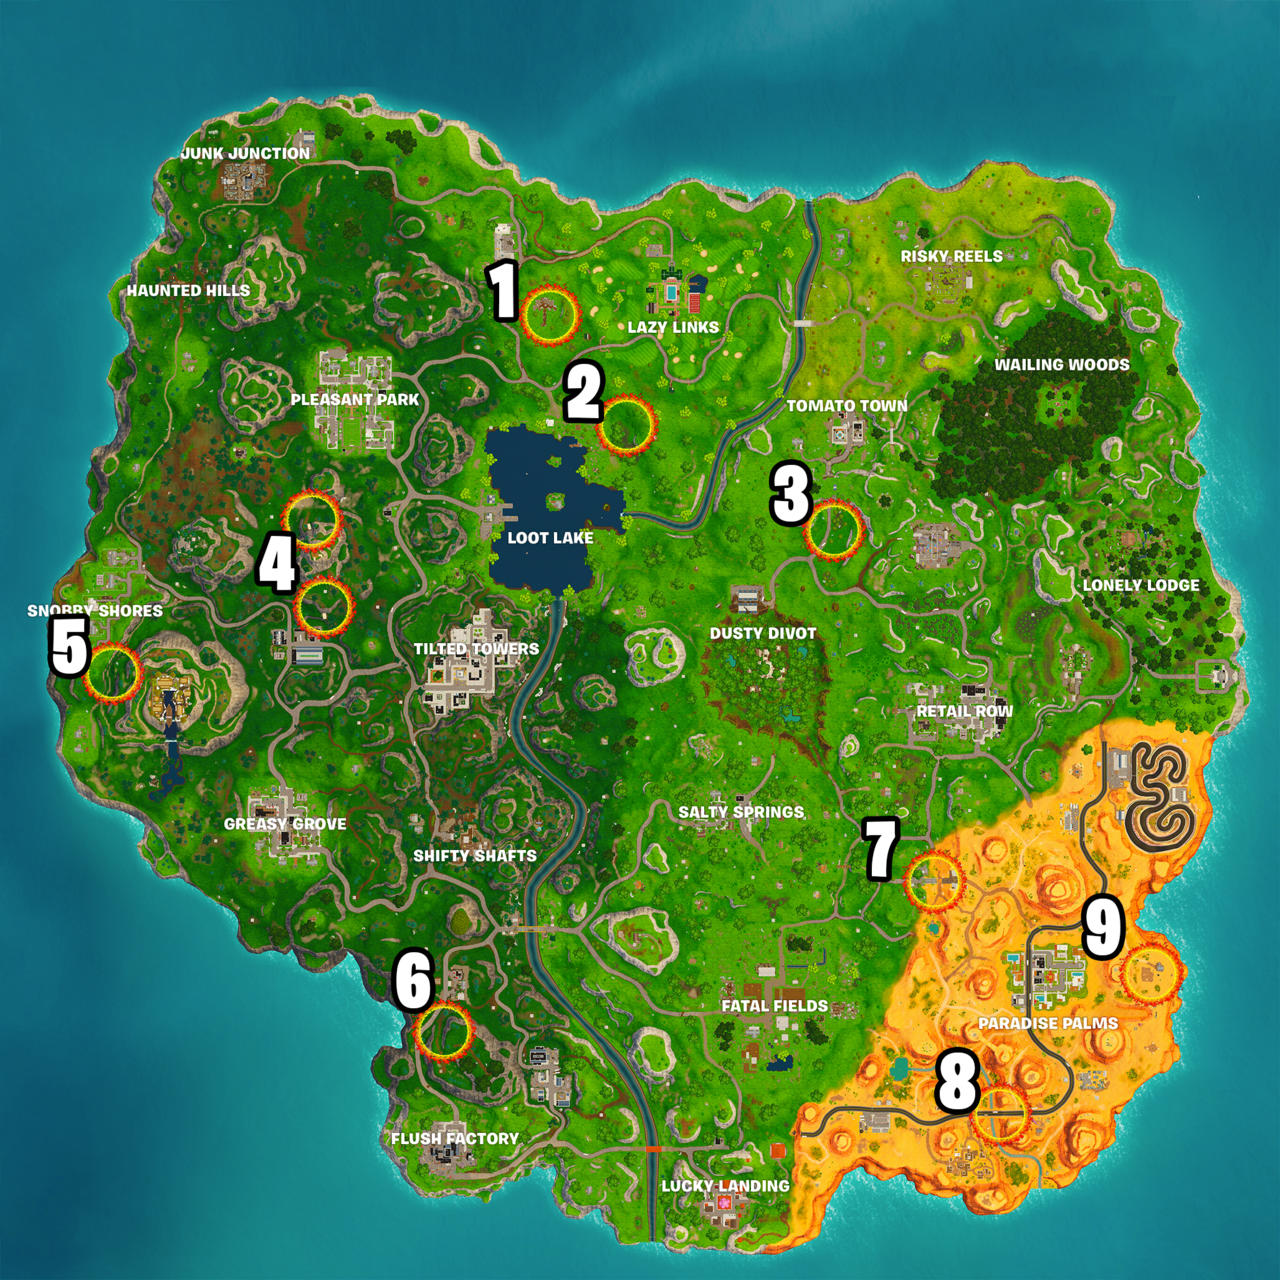 Guides On Flaming Hoops Locations In Fortnite Week 4 Fortnite Tips - guides on flaming hoops locations in fortnite week 4